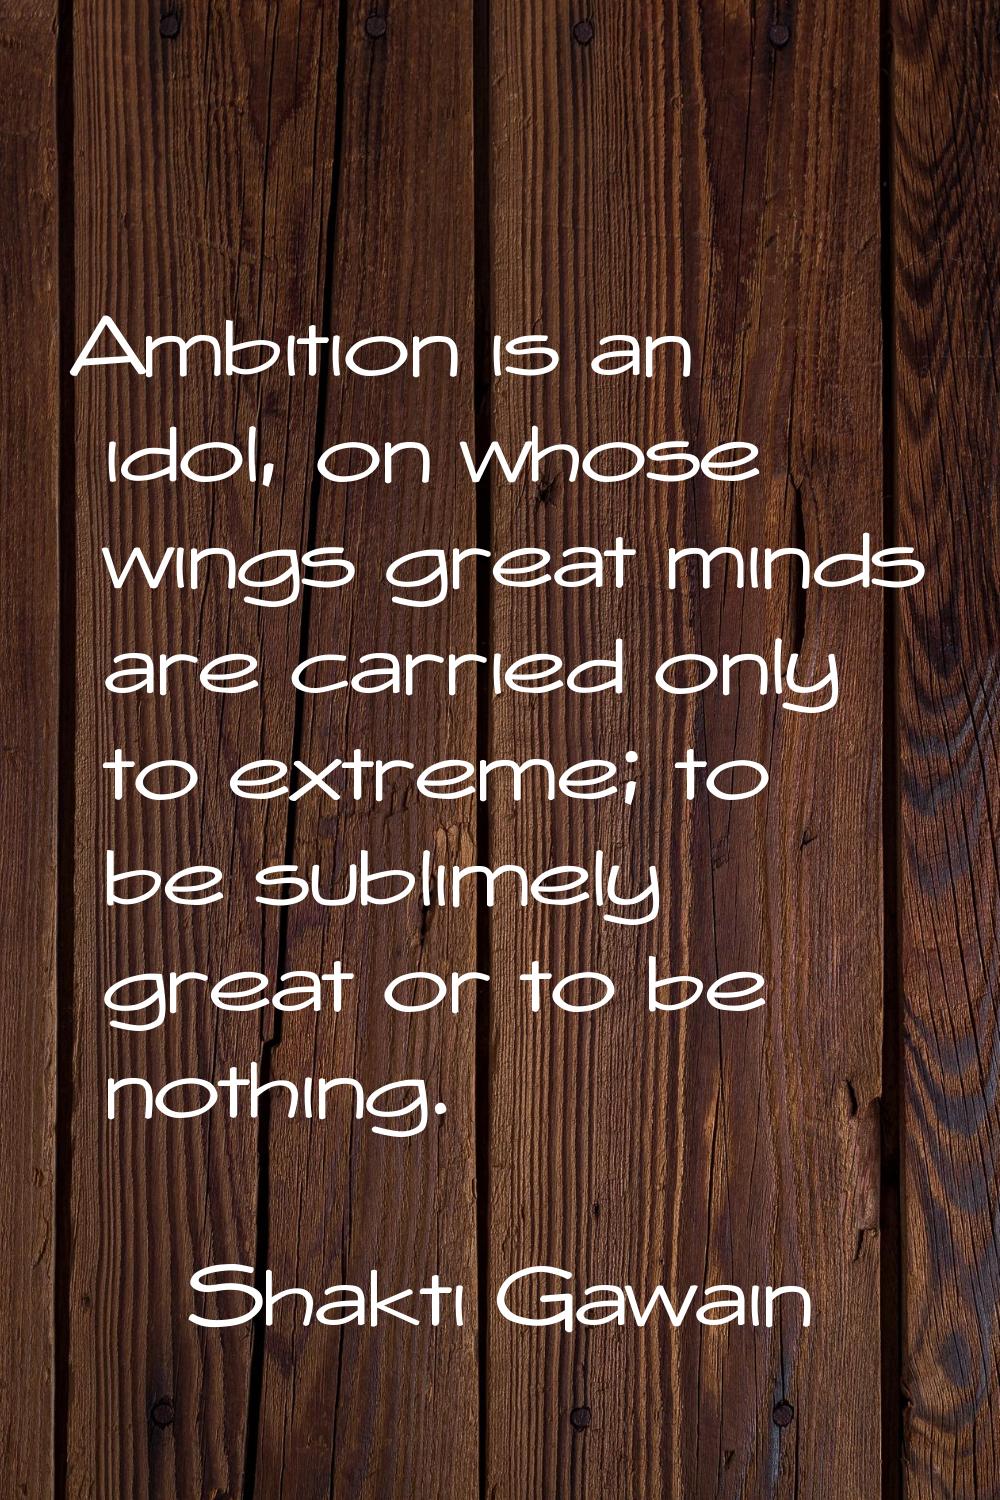 Ambition is an idol, on whose wings great minds are carried only to extreme; to be sublimely great 